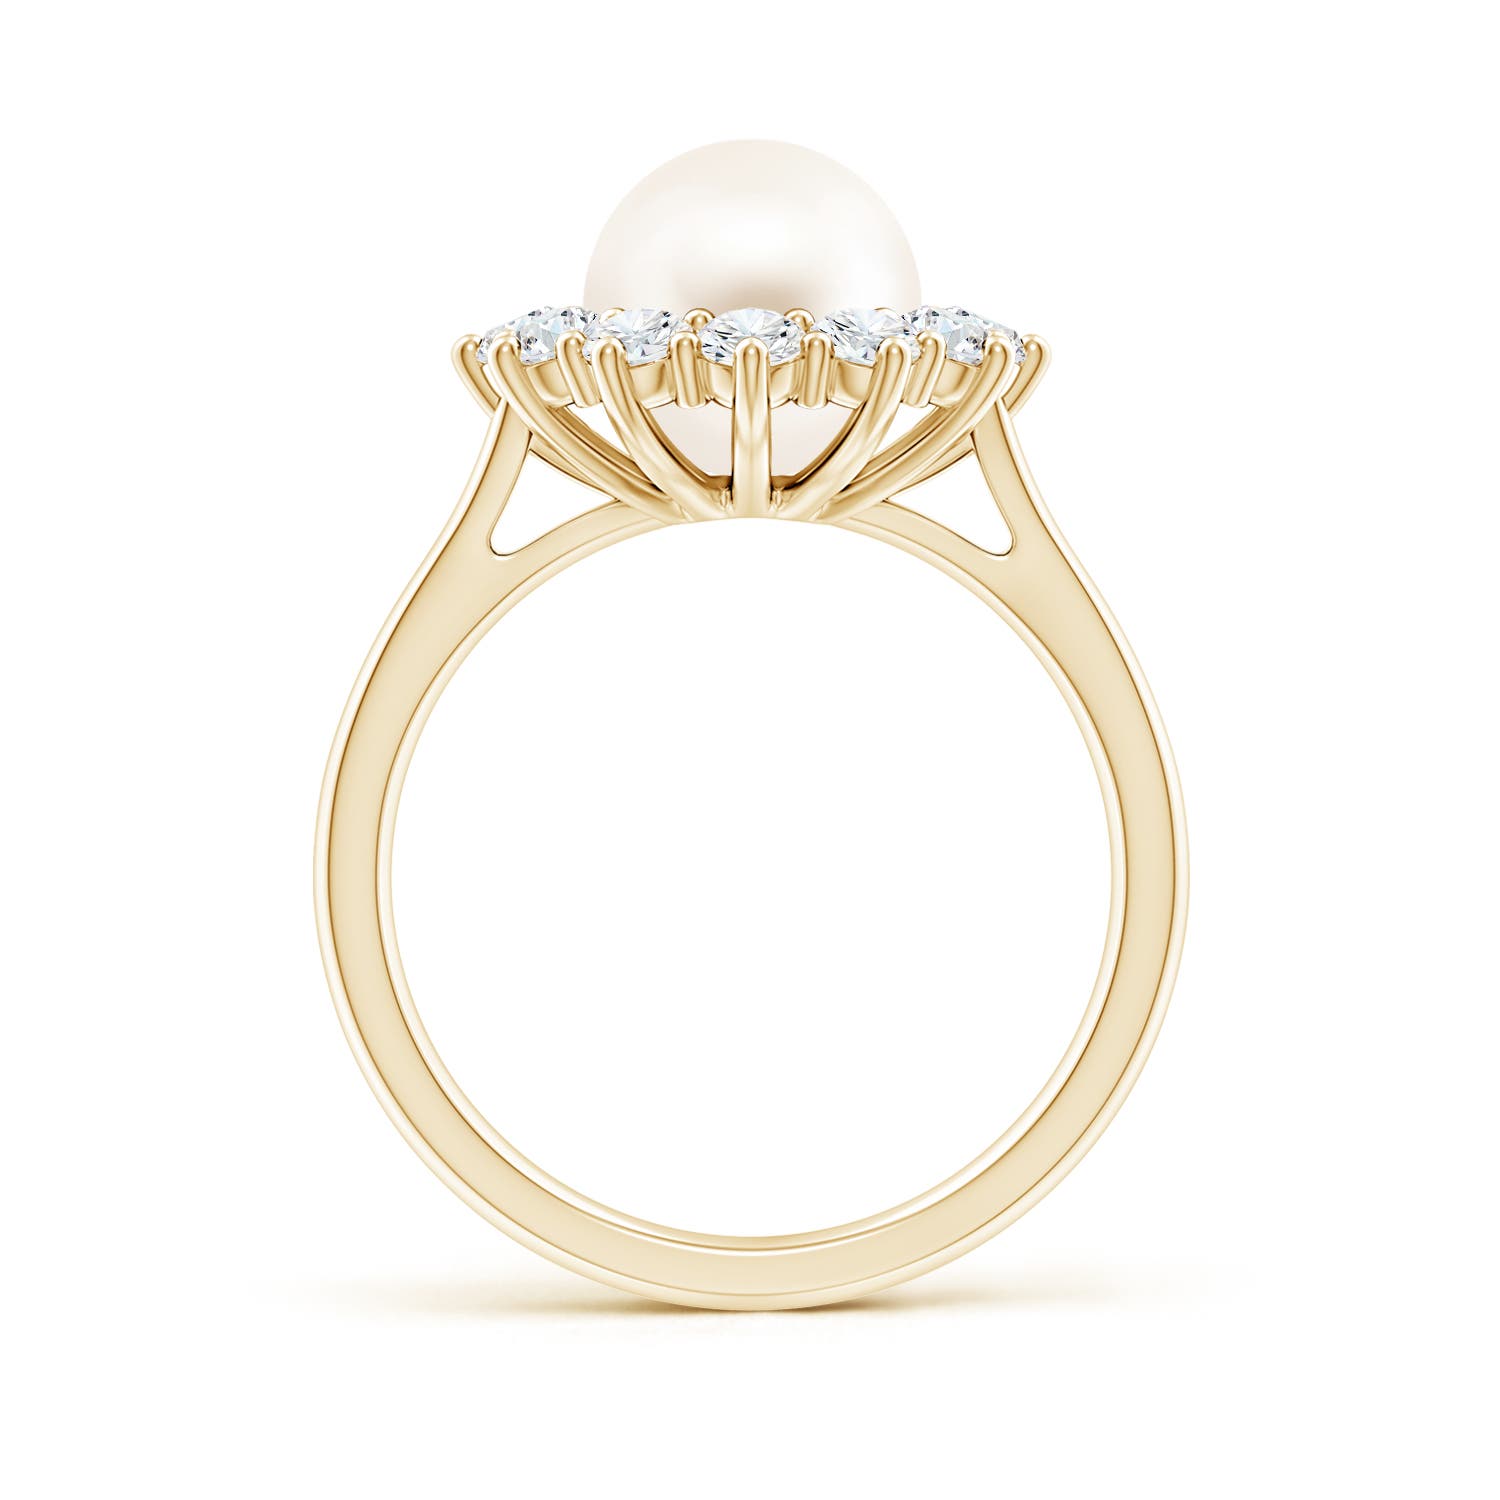 AAA / 4.4 CT / 14 KT Yellow Gold